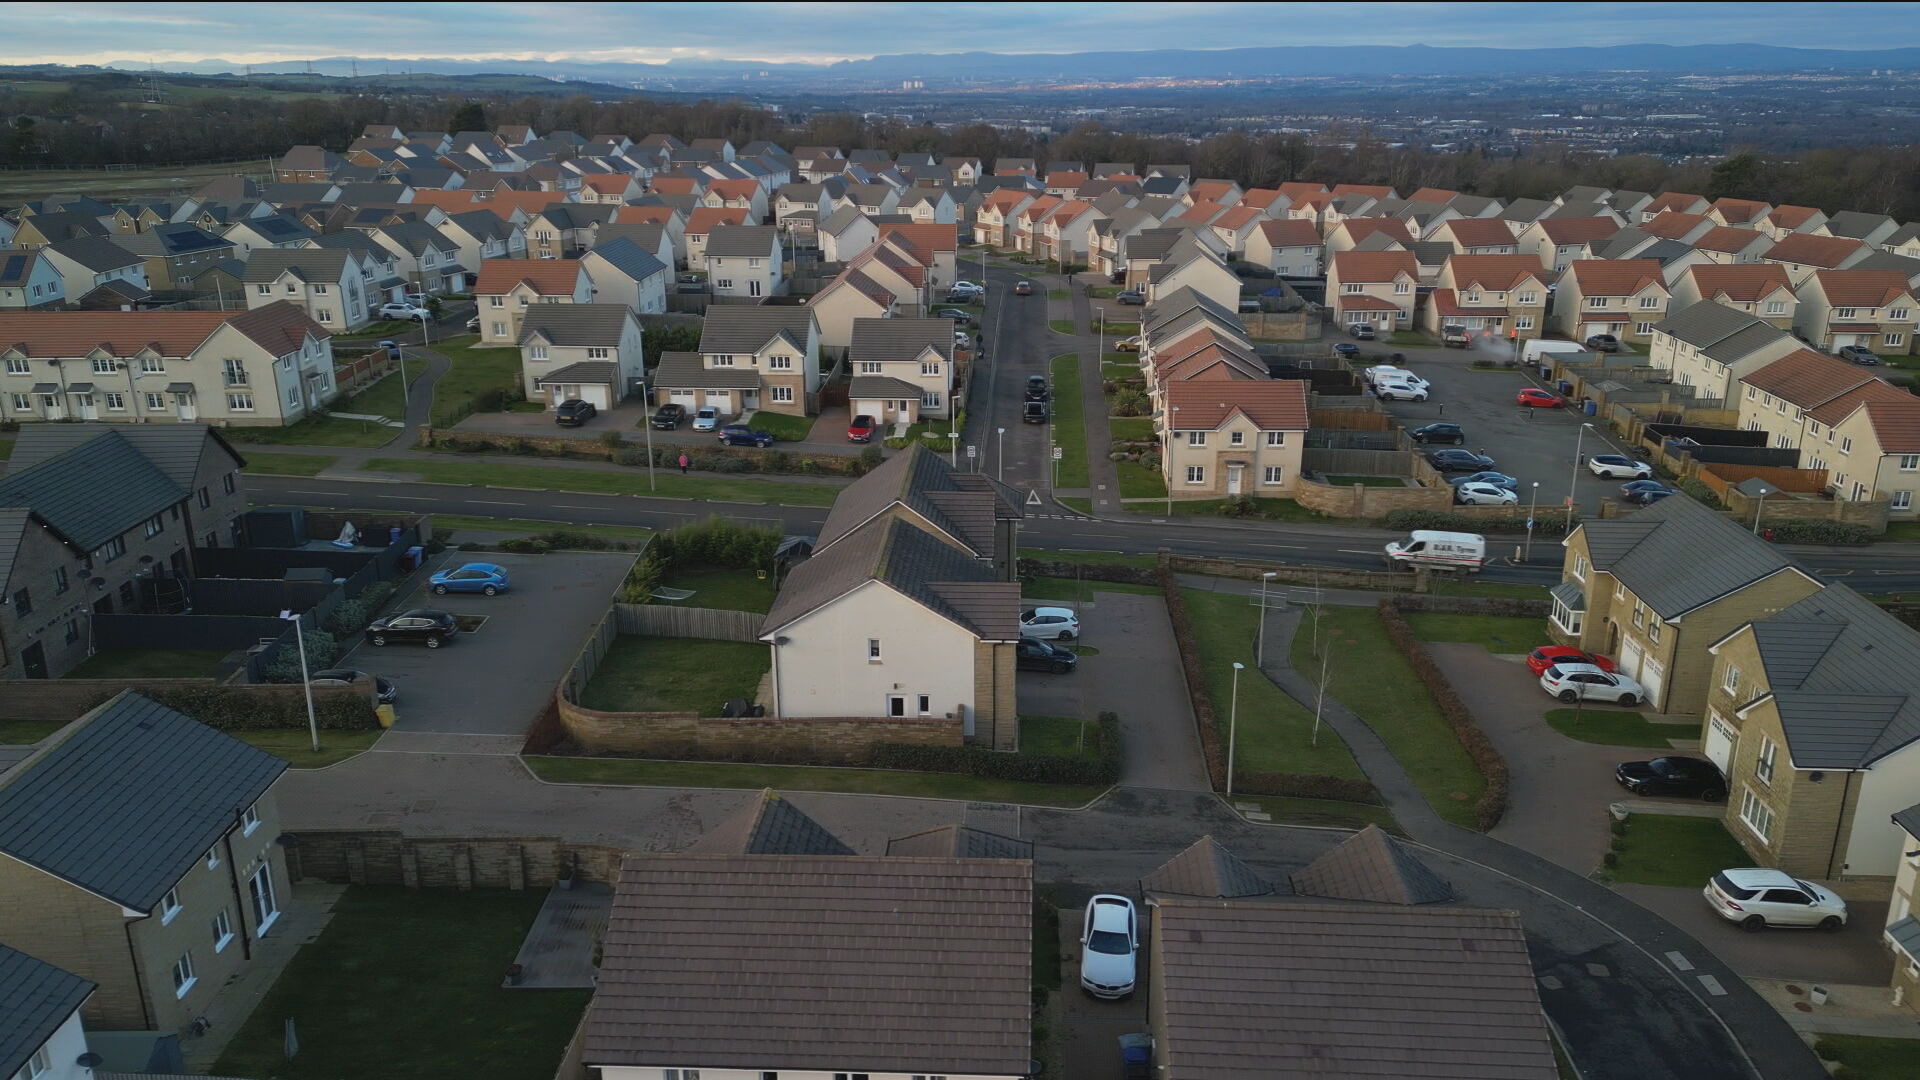 Homeowners have told STV News they feel 'anxious' about the future on the Group's sites. Photo: STV News.